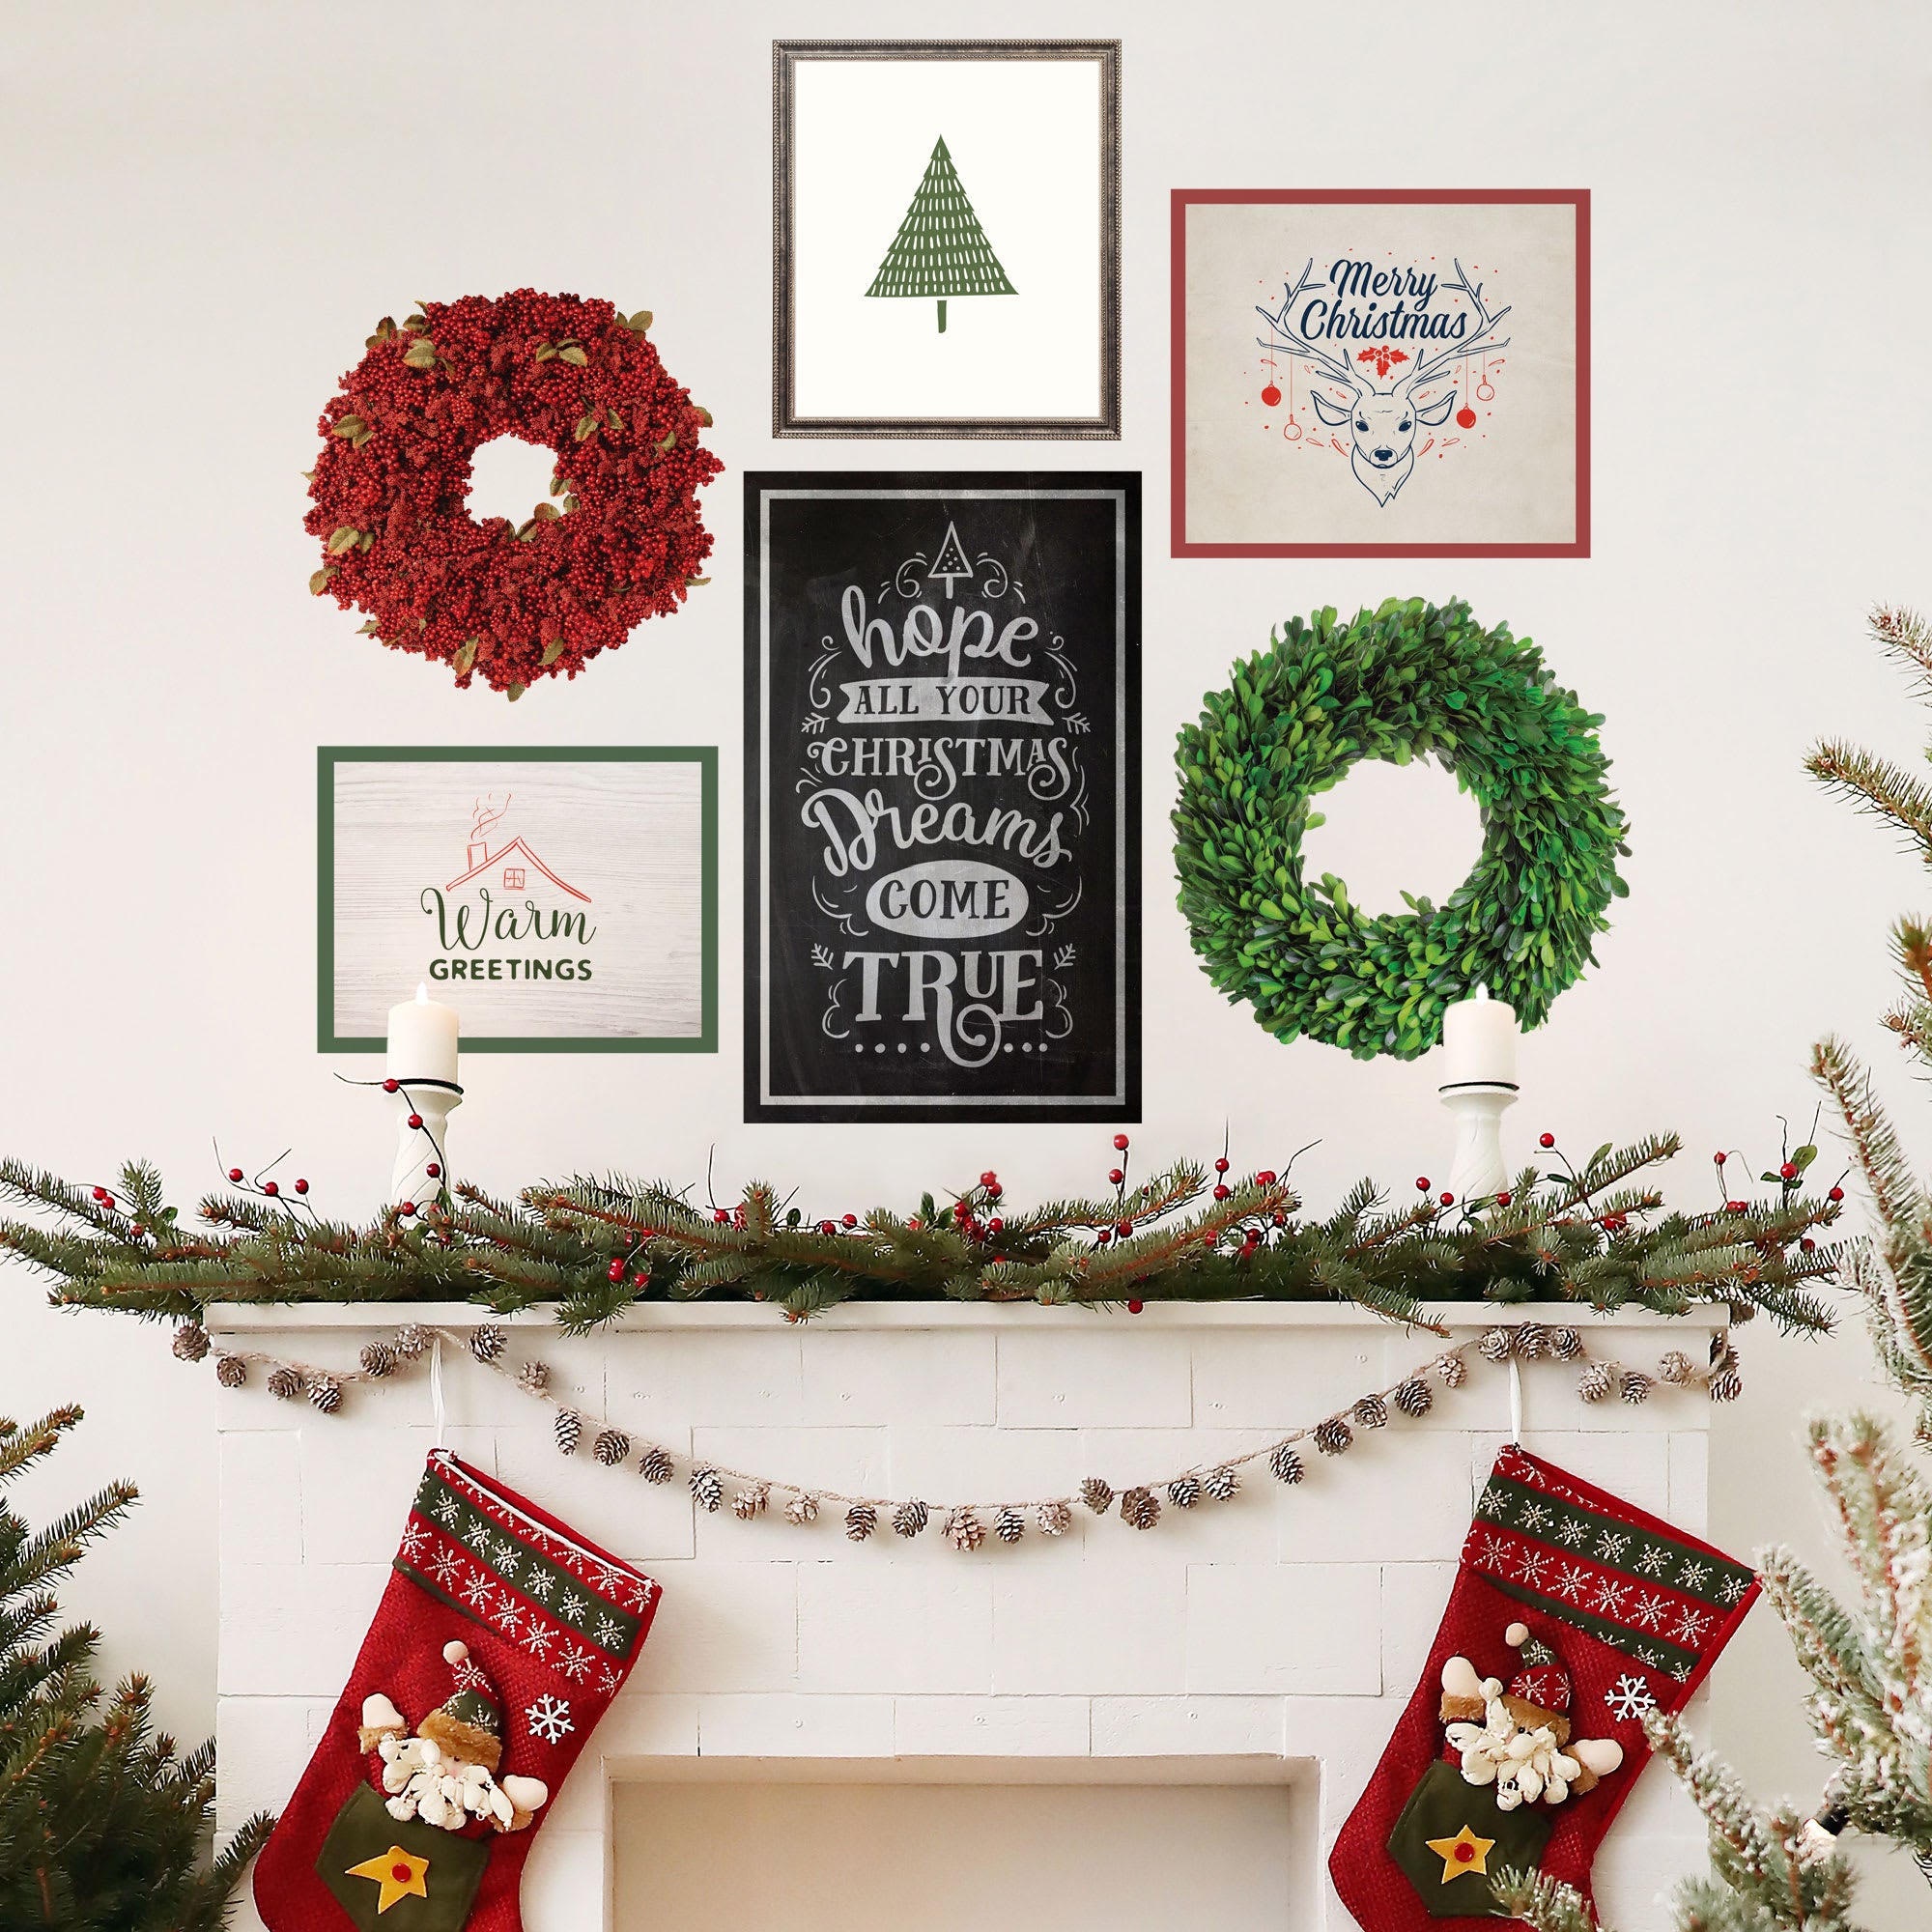 Christmas: Gallery Decor Wall Signs - Removable Vinyl Decal 54.0"W x 40.0"H by Fathead